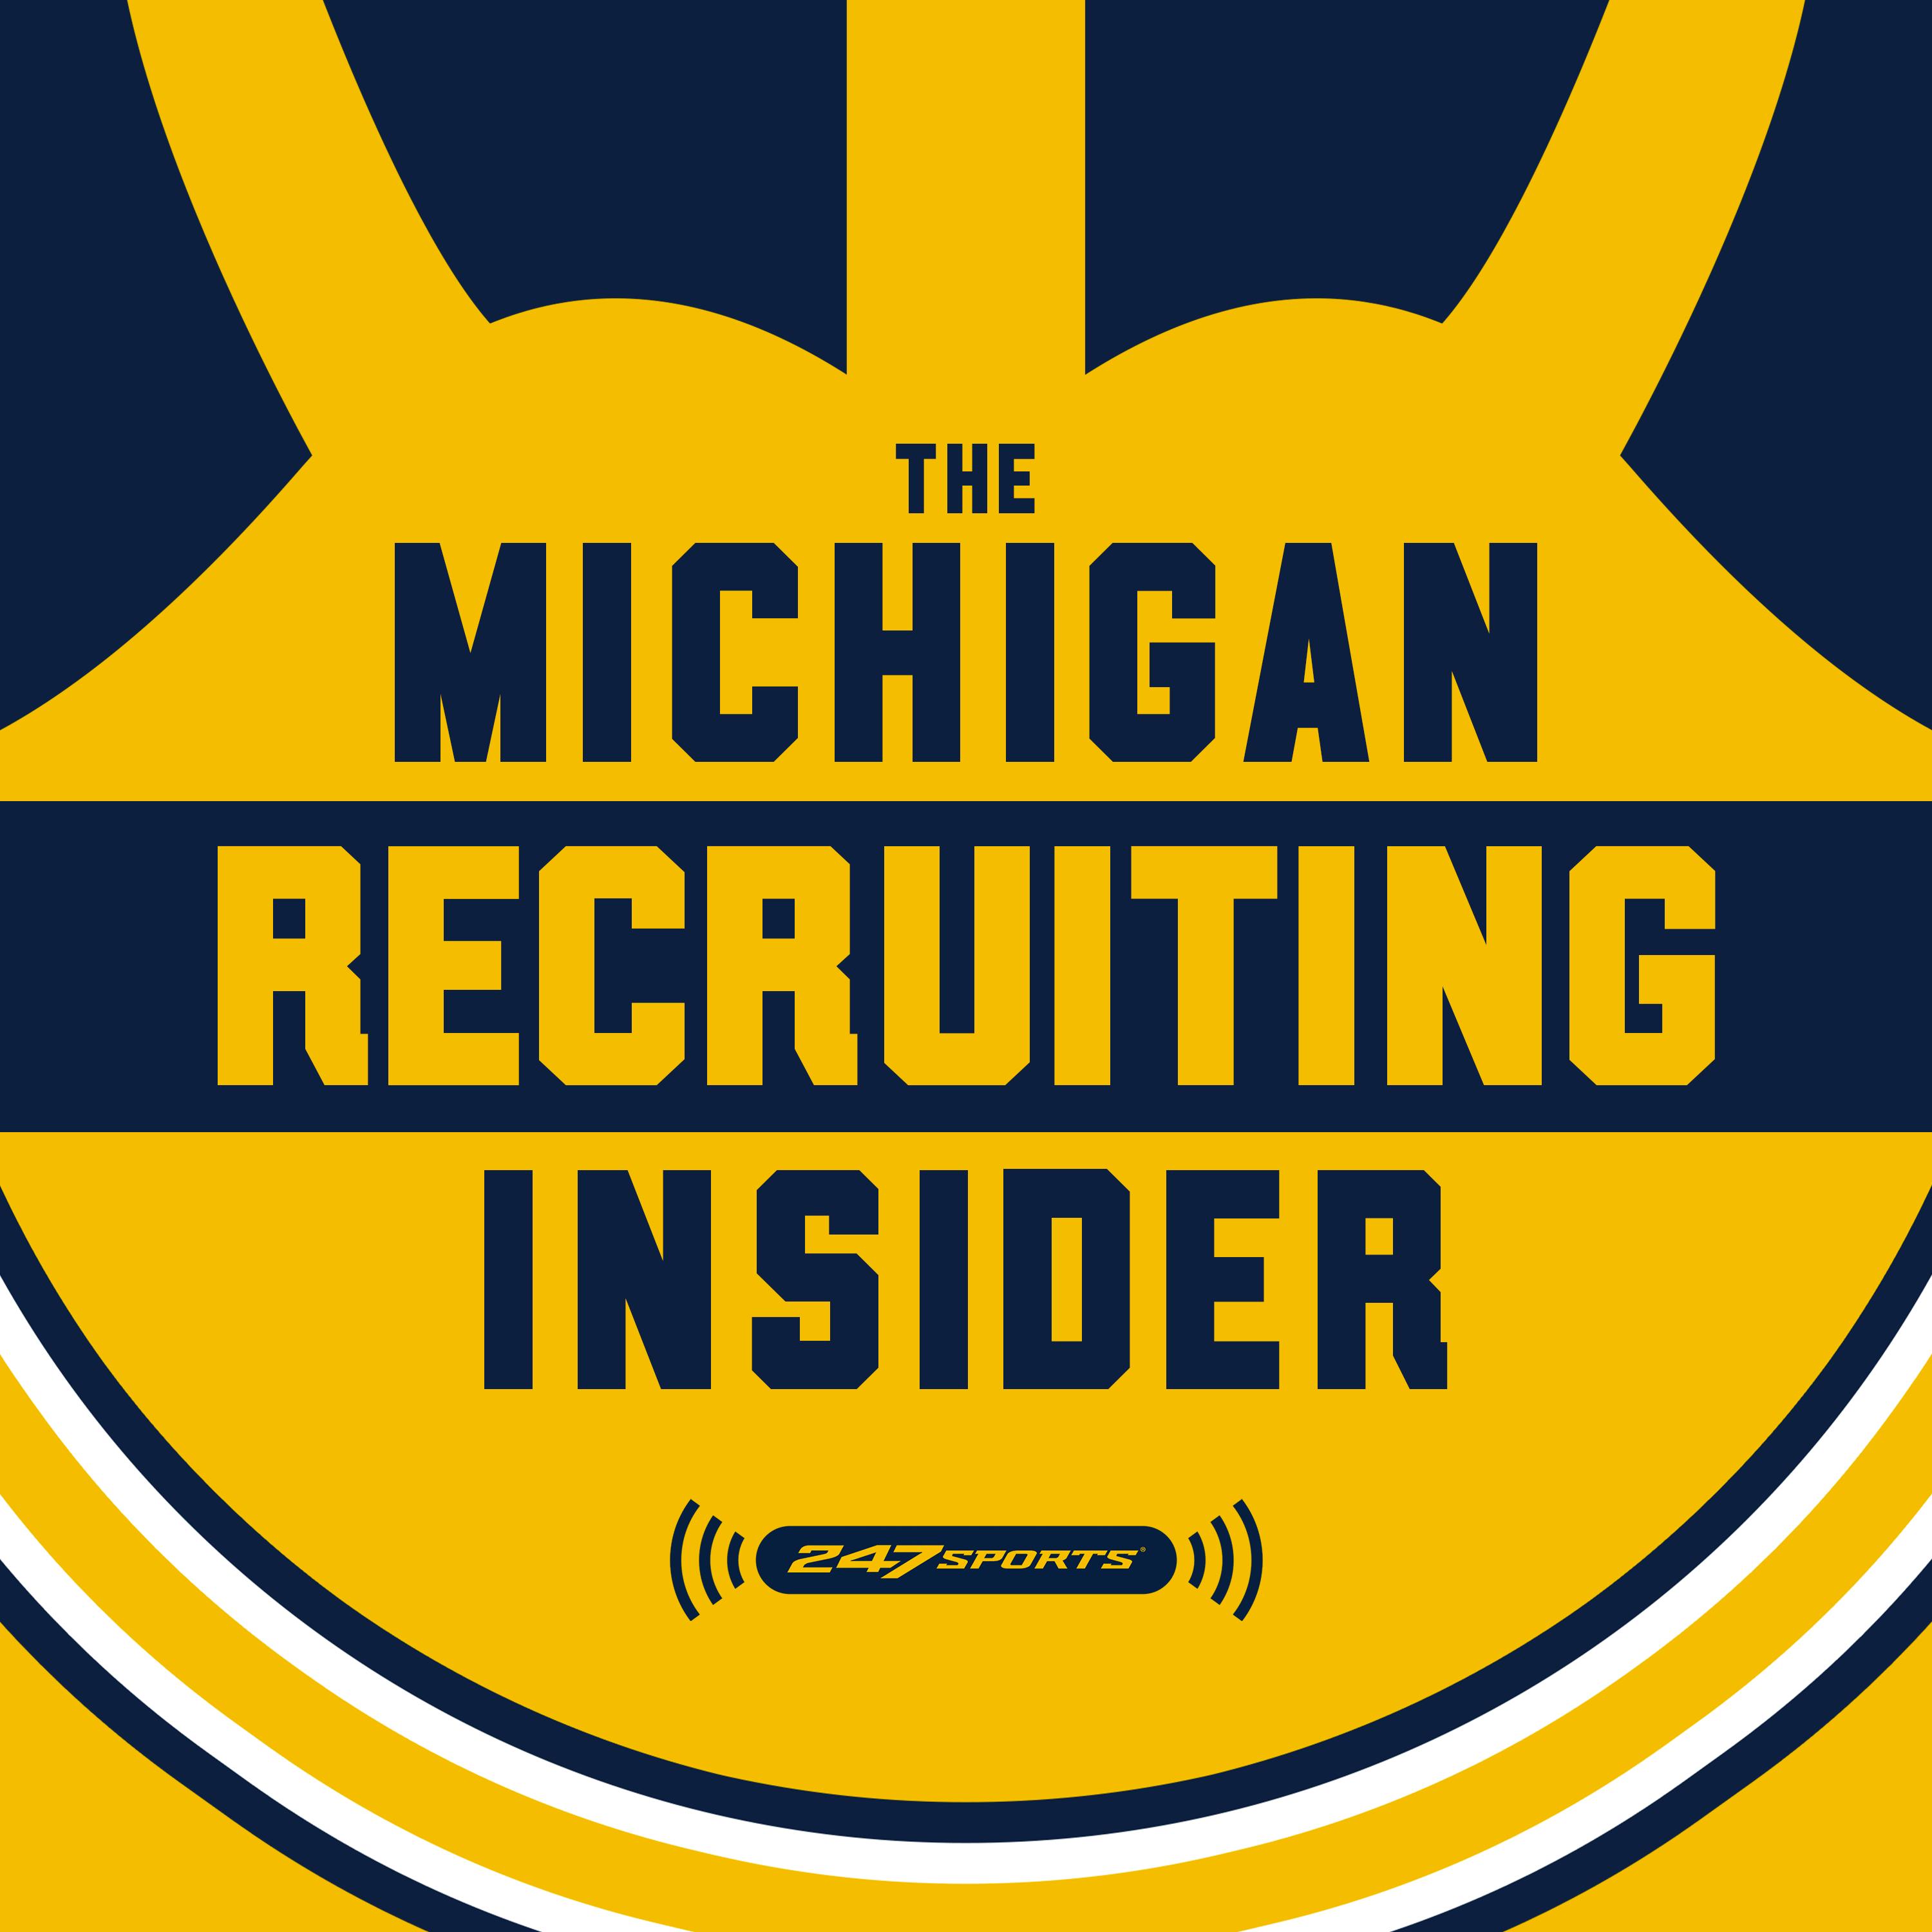 Andrew Sprague is latest recruiting domino; Who’s next? - Michigan Recruiting Insider